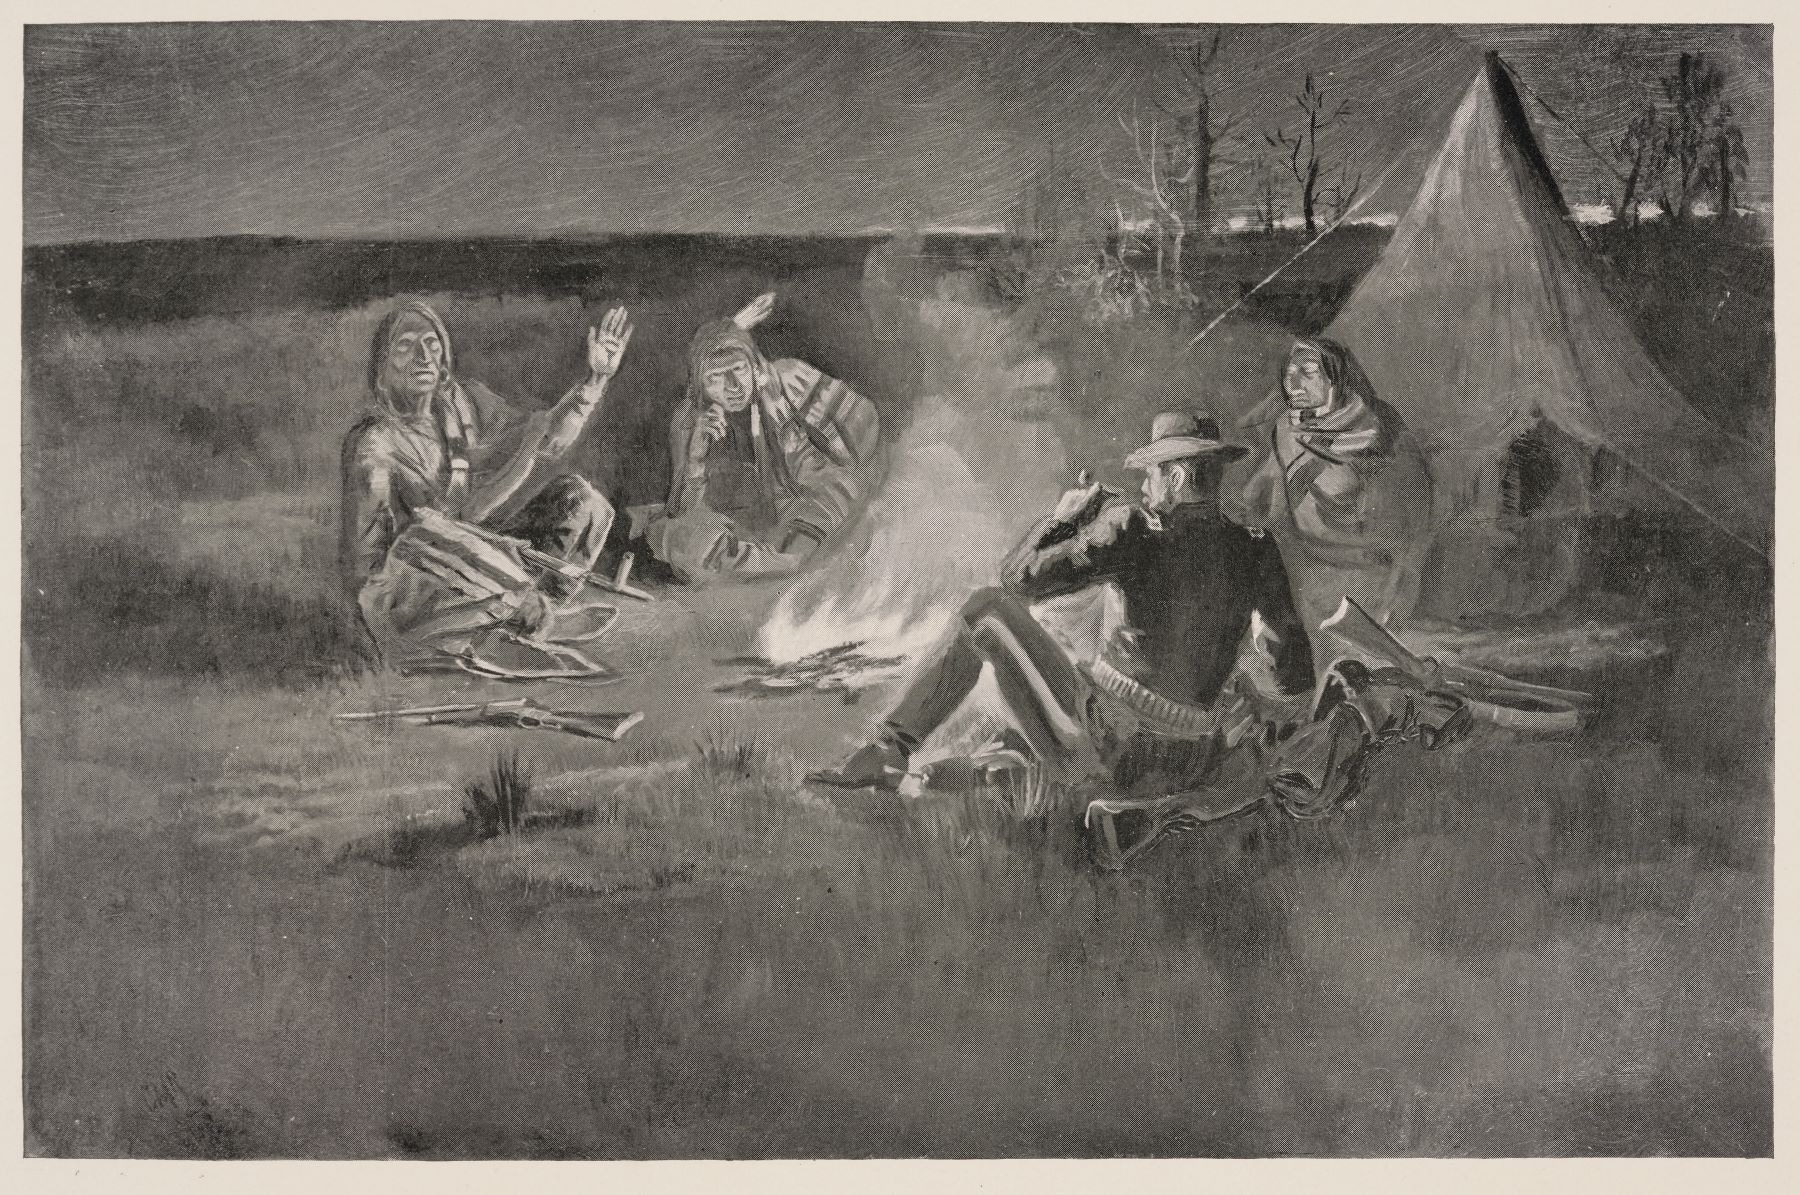 A white military officer sitting at a campsite at night with three Indigenous people